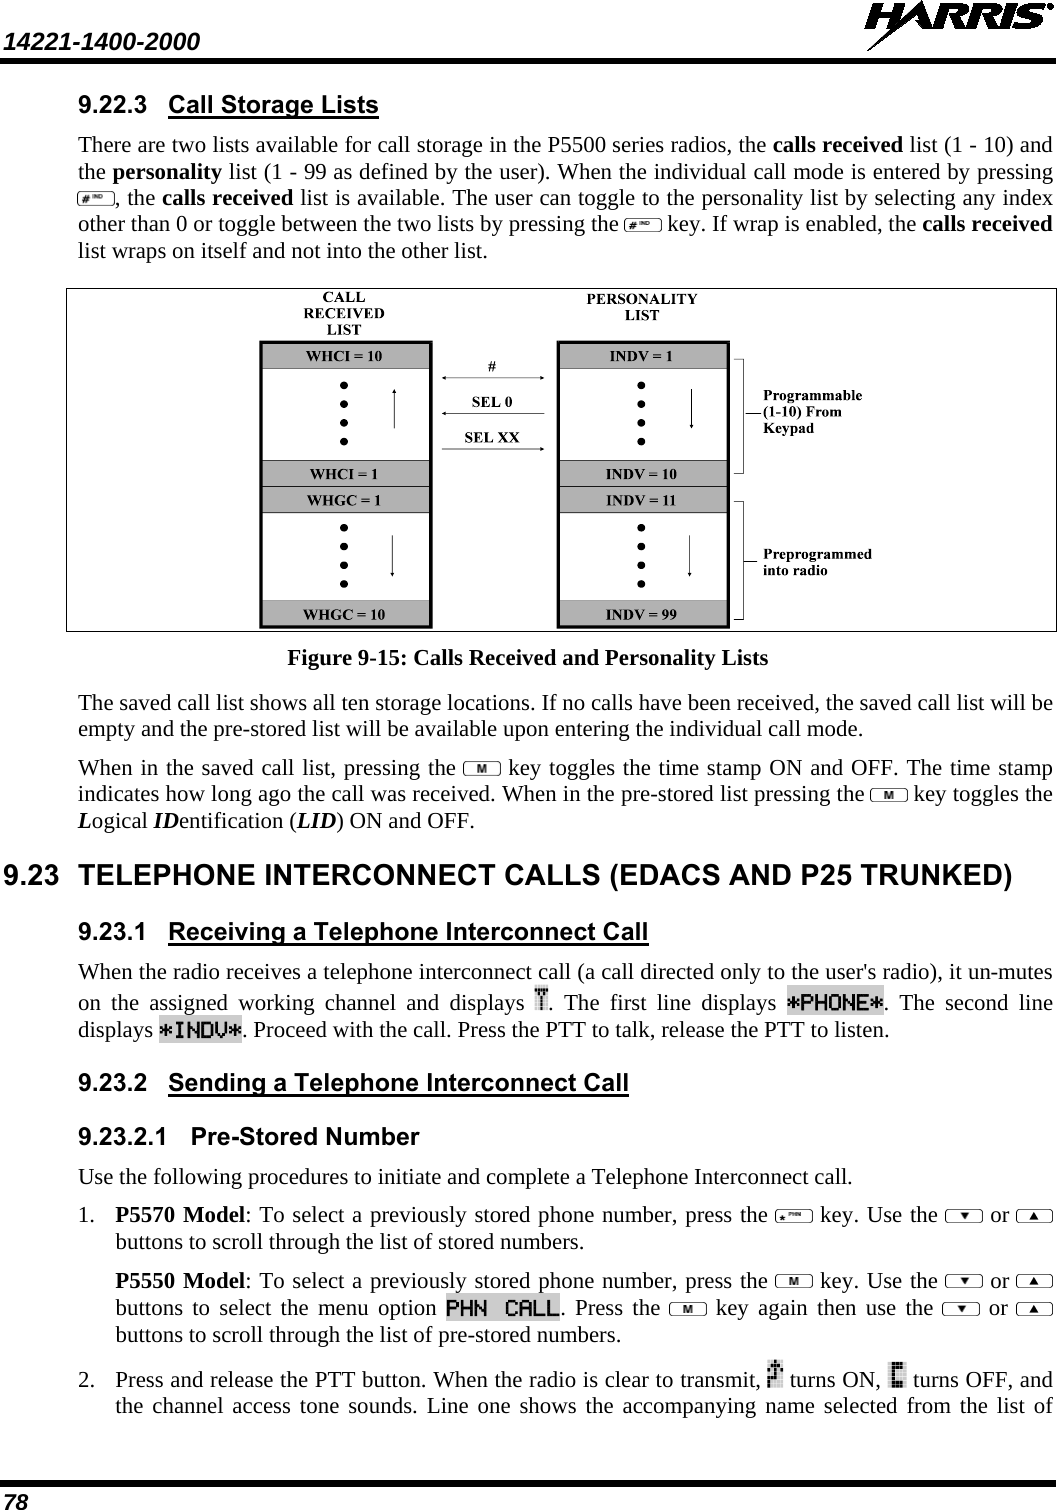 14221-1400-2000    78 9.22.3 Call Storage Lists There are two lists available for call storage in the P5500 series radios, the calls received list (1 - 10) and the personality list (1 - 99 as defined by the user). When the individual call mode is entered by pressing , the calls received list is available. The user can toggle to the personality list by selecting any index other than 0 or toggle between the two lists by pressing the   key. If wrap is enabled, the calls received list wraps on itself and not into the other list.  Figure 9-15: Calls Received and Personality Lists The saved call list shows all ten storage locations. If no calls have been received, the saved call list will be empty and the pre-stored list will be available upon entering the individual call mode.  When in the saved call list, pressing the   key toggles the time stamp ON and OFF. The time stamp indicates how long ago the call was received. When in the pre-stored list pressing the   key toggles the Logical IDentification (LID) ON and OFF. 9.23 TELEPHONE INTERCONNECT CALLS (EDACS AND P25 TRUNKED) 9.23.1 Receiving a Telephone Interconnect Call When the radio receives a telephone interconnect call (a call directed only to the user&apos;s radio), it un-mutes on the assigned working channel and displays  . The first line displays  *PHONE*. The second line displays *INDV*. Proceed with the call. Press the PTT to talk, release the PTT to listen. 9.23.2 Sending a Telephone Interconnect Call 9.23.2.1 Pre-Stored Number Use the following procedures to initiate and complete a Telephone Interconnect call.  1. P5570 Model: To select a previously stored phone number, press the   key. Use the   or  buttons to scroll through the list of stored numbers.  P5550 Model: To select a previously stored phone number, press the   key. Use the   or  buttons to select the menu option PHN CALL. Press the   key again then use the   or  buttons to scroll through the list of pre-stored numbers.  2. Press and release the PTT button. When the radio is clear to transmit,   turns ON,   turns OFF, and the channel access tone sounds. Line one shows the accompanying name selected from the list of 